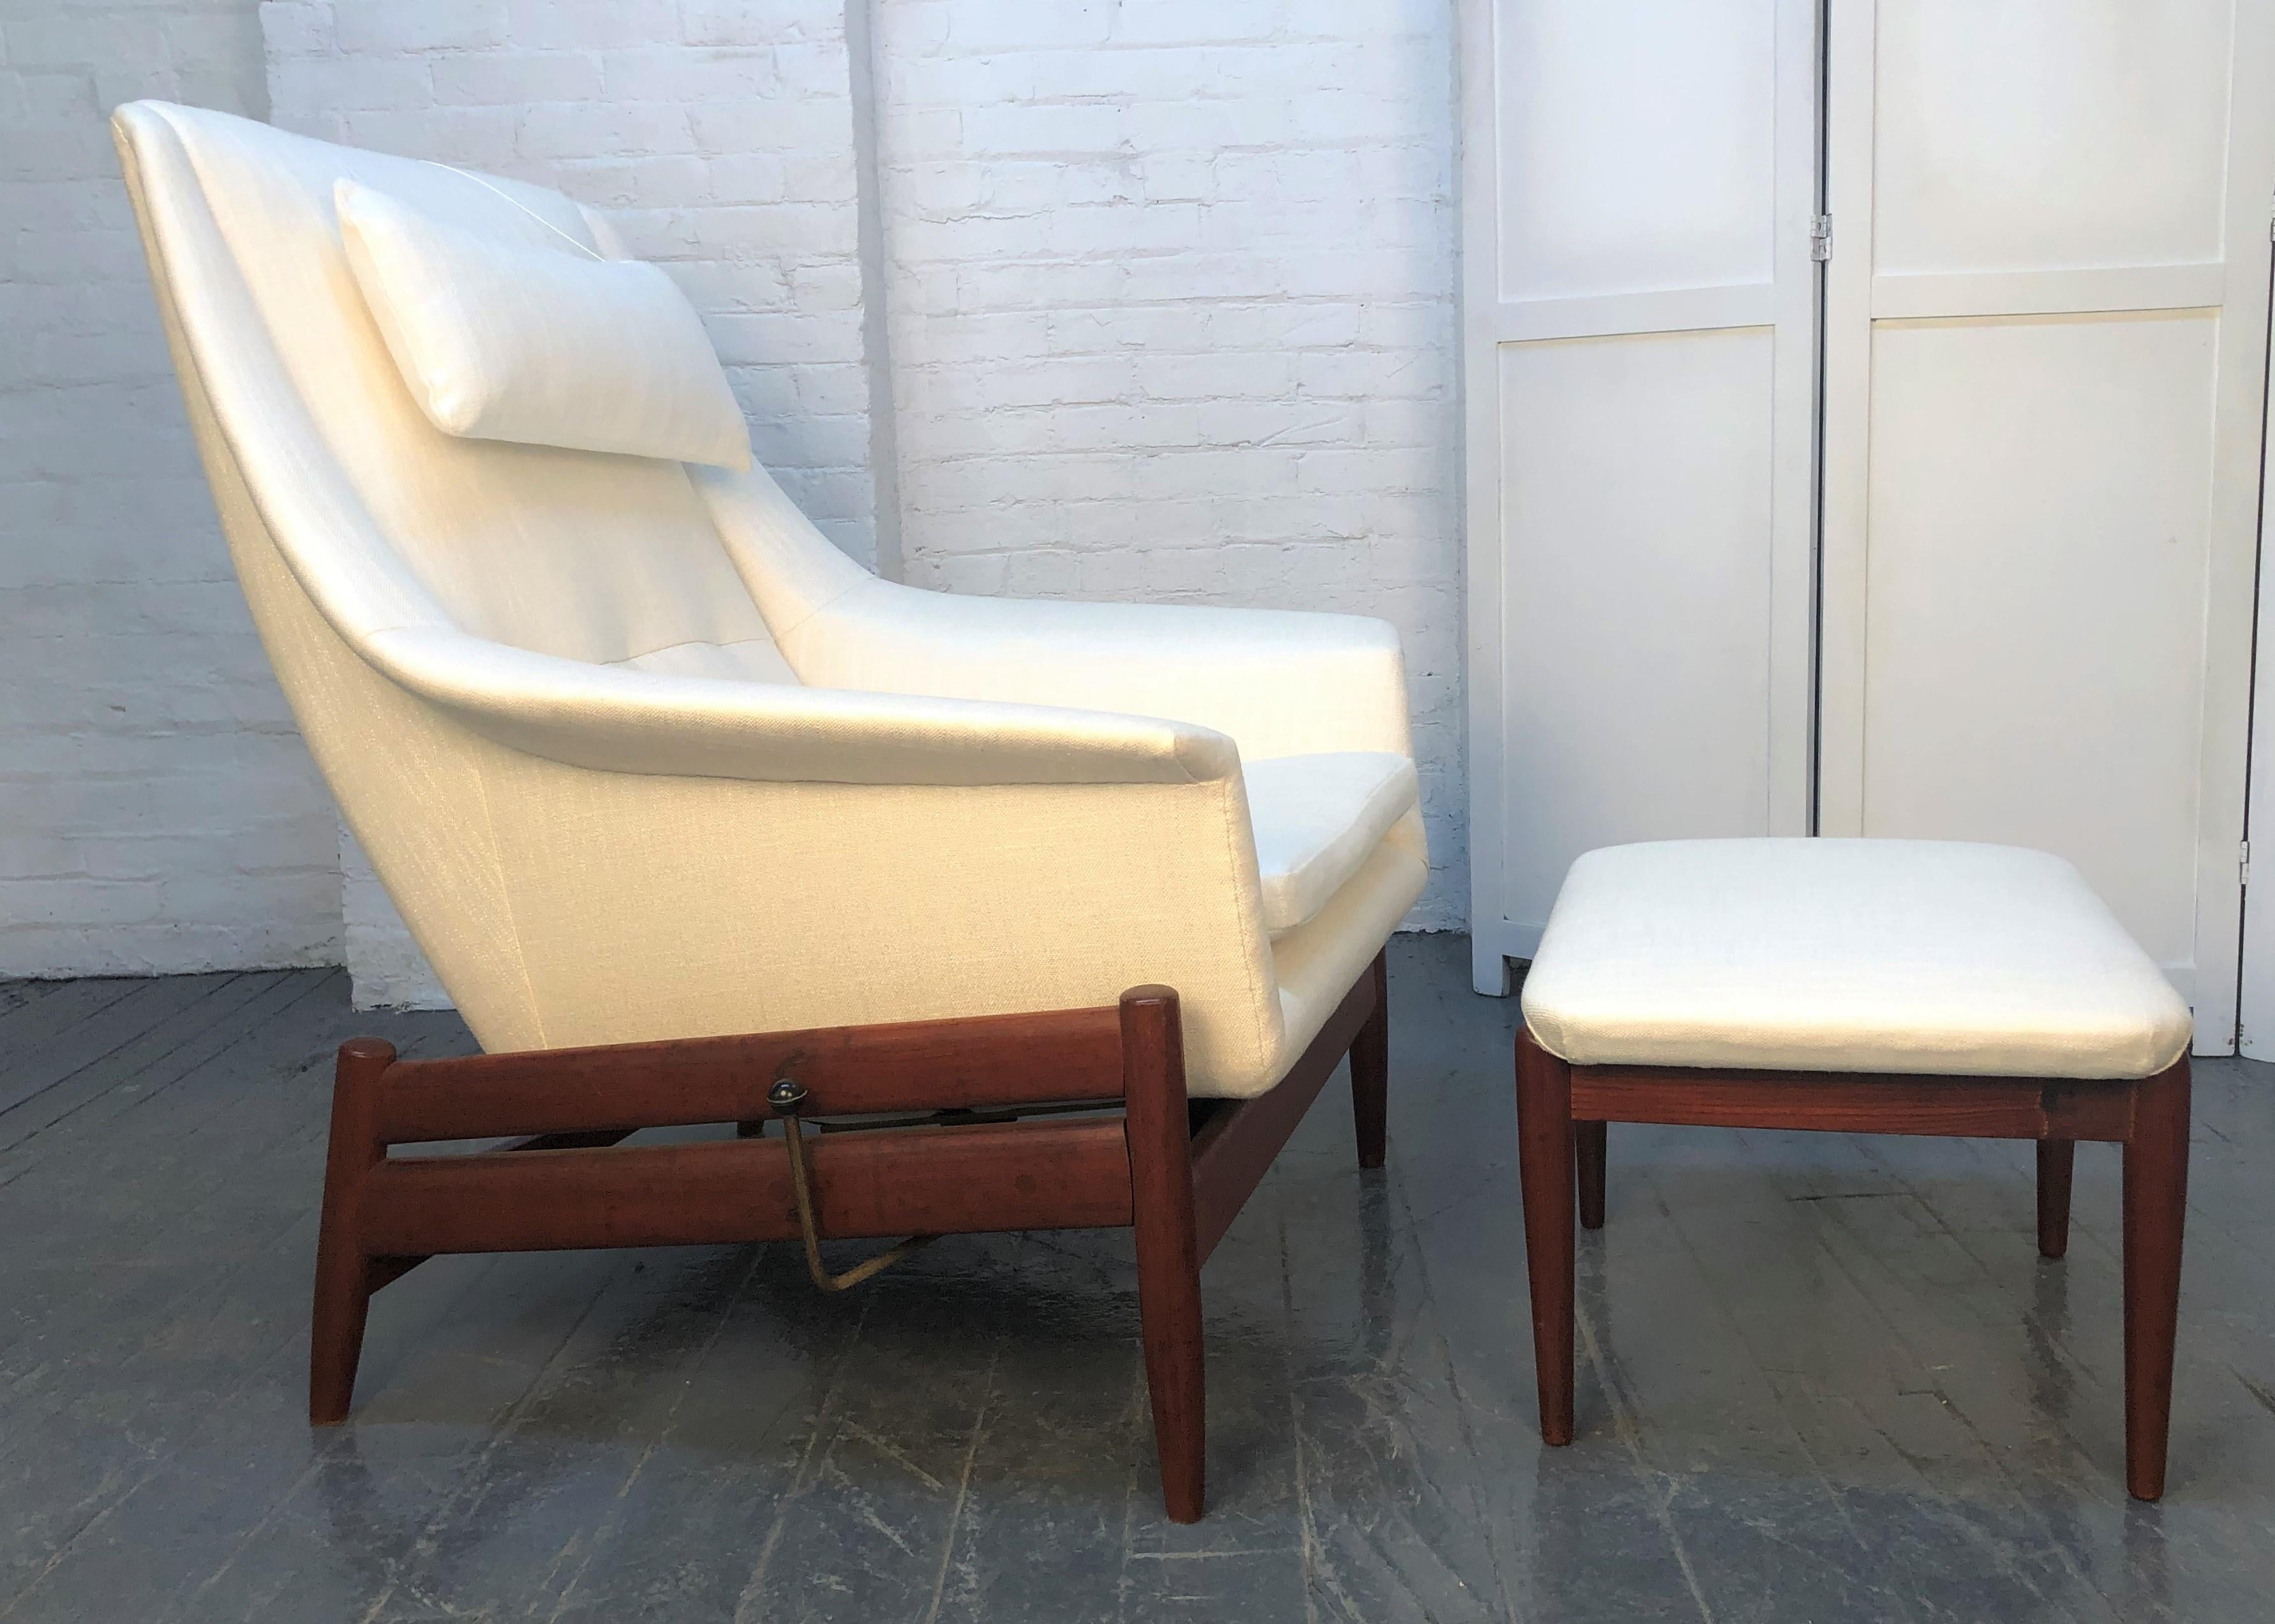 Ib Kofod-Larsen for Povl Dinesen Danish modern lounge chair and ottoman. The lounge chair rocks slightly and the ottoman is height adjustable. Mechanism on the side of the chair locks the chair in place. Has a removable headrest.
Measures (Chair)